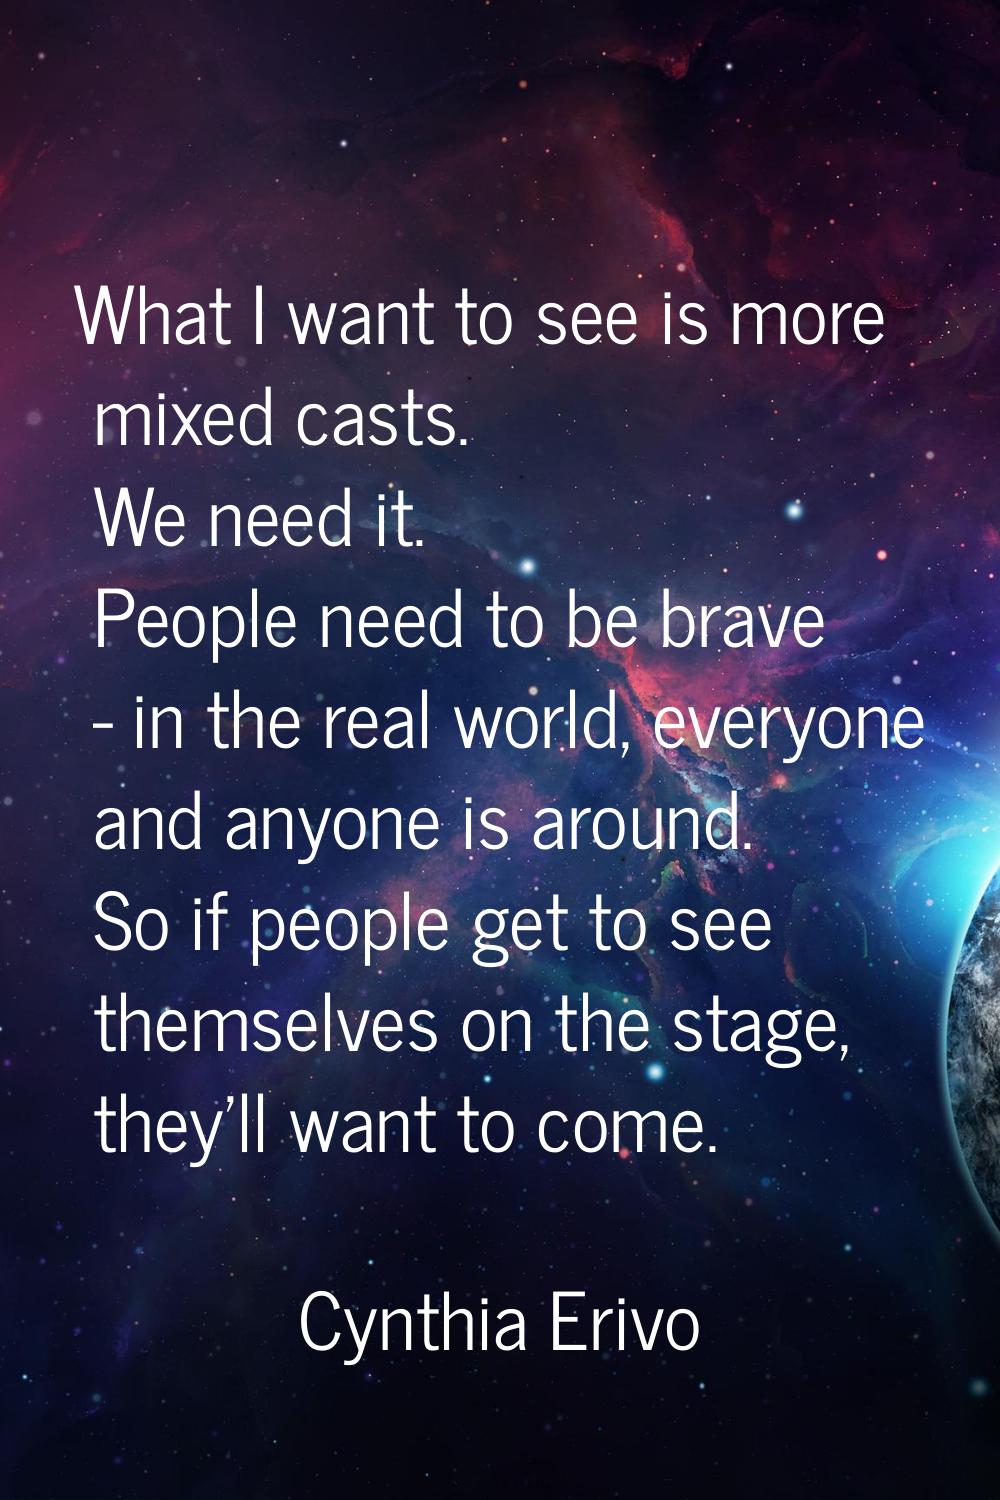 What I want to see is more mixed casts. We need it. People need to be brave - in the real world, ev